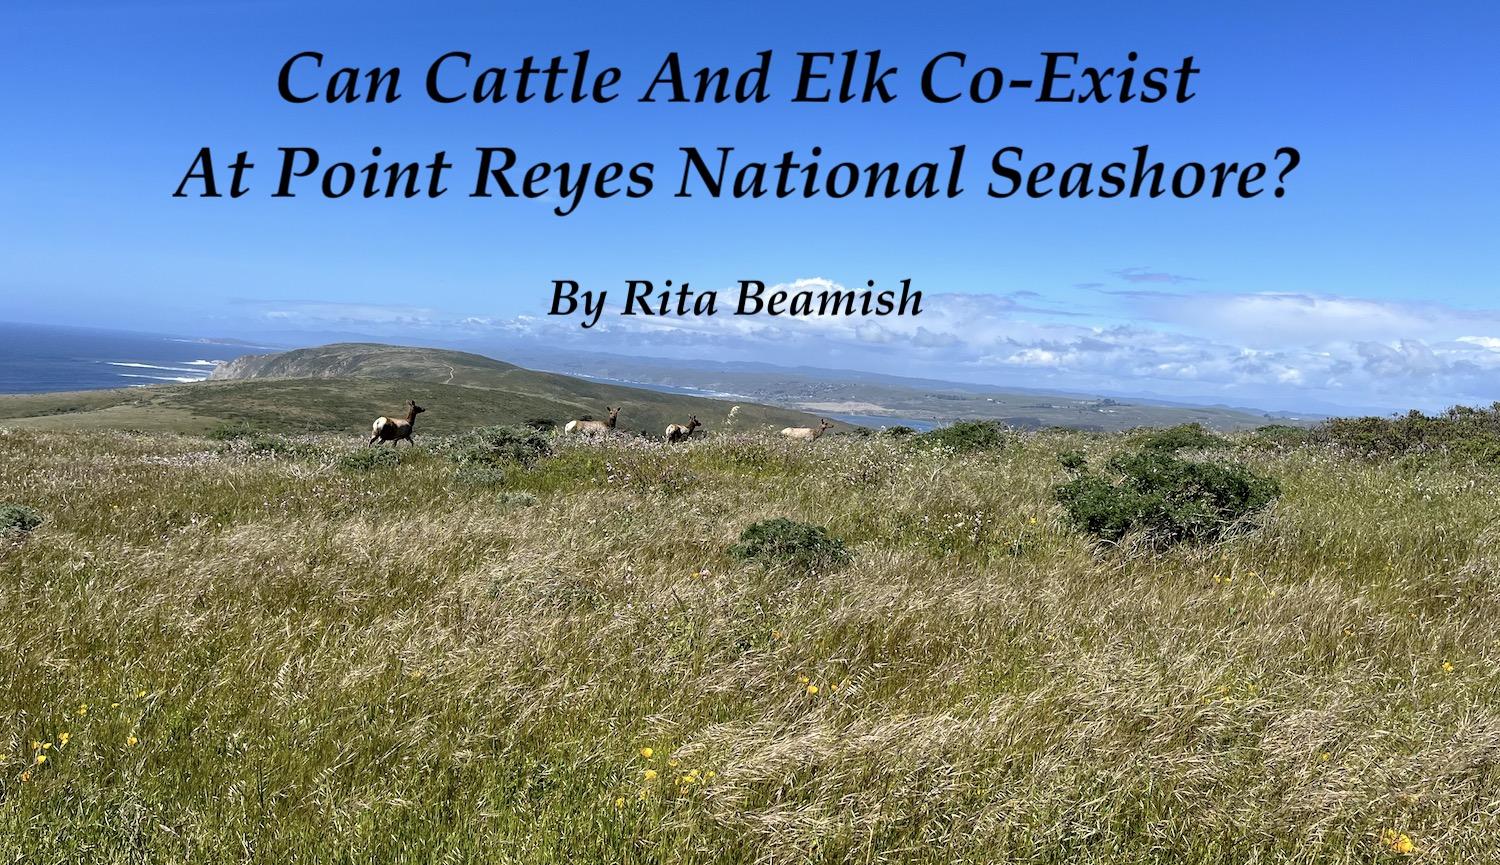 Can cattle and Tule elk co-exist at Point Reyes National Seashore